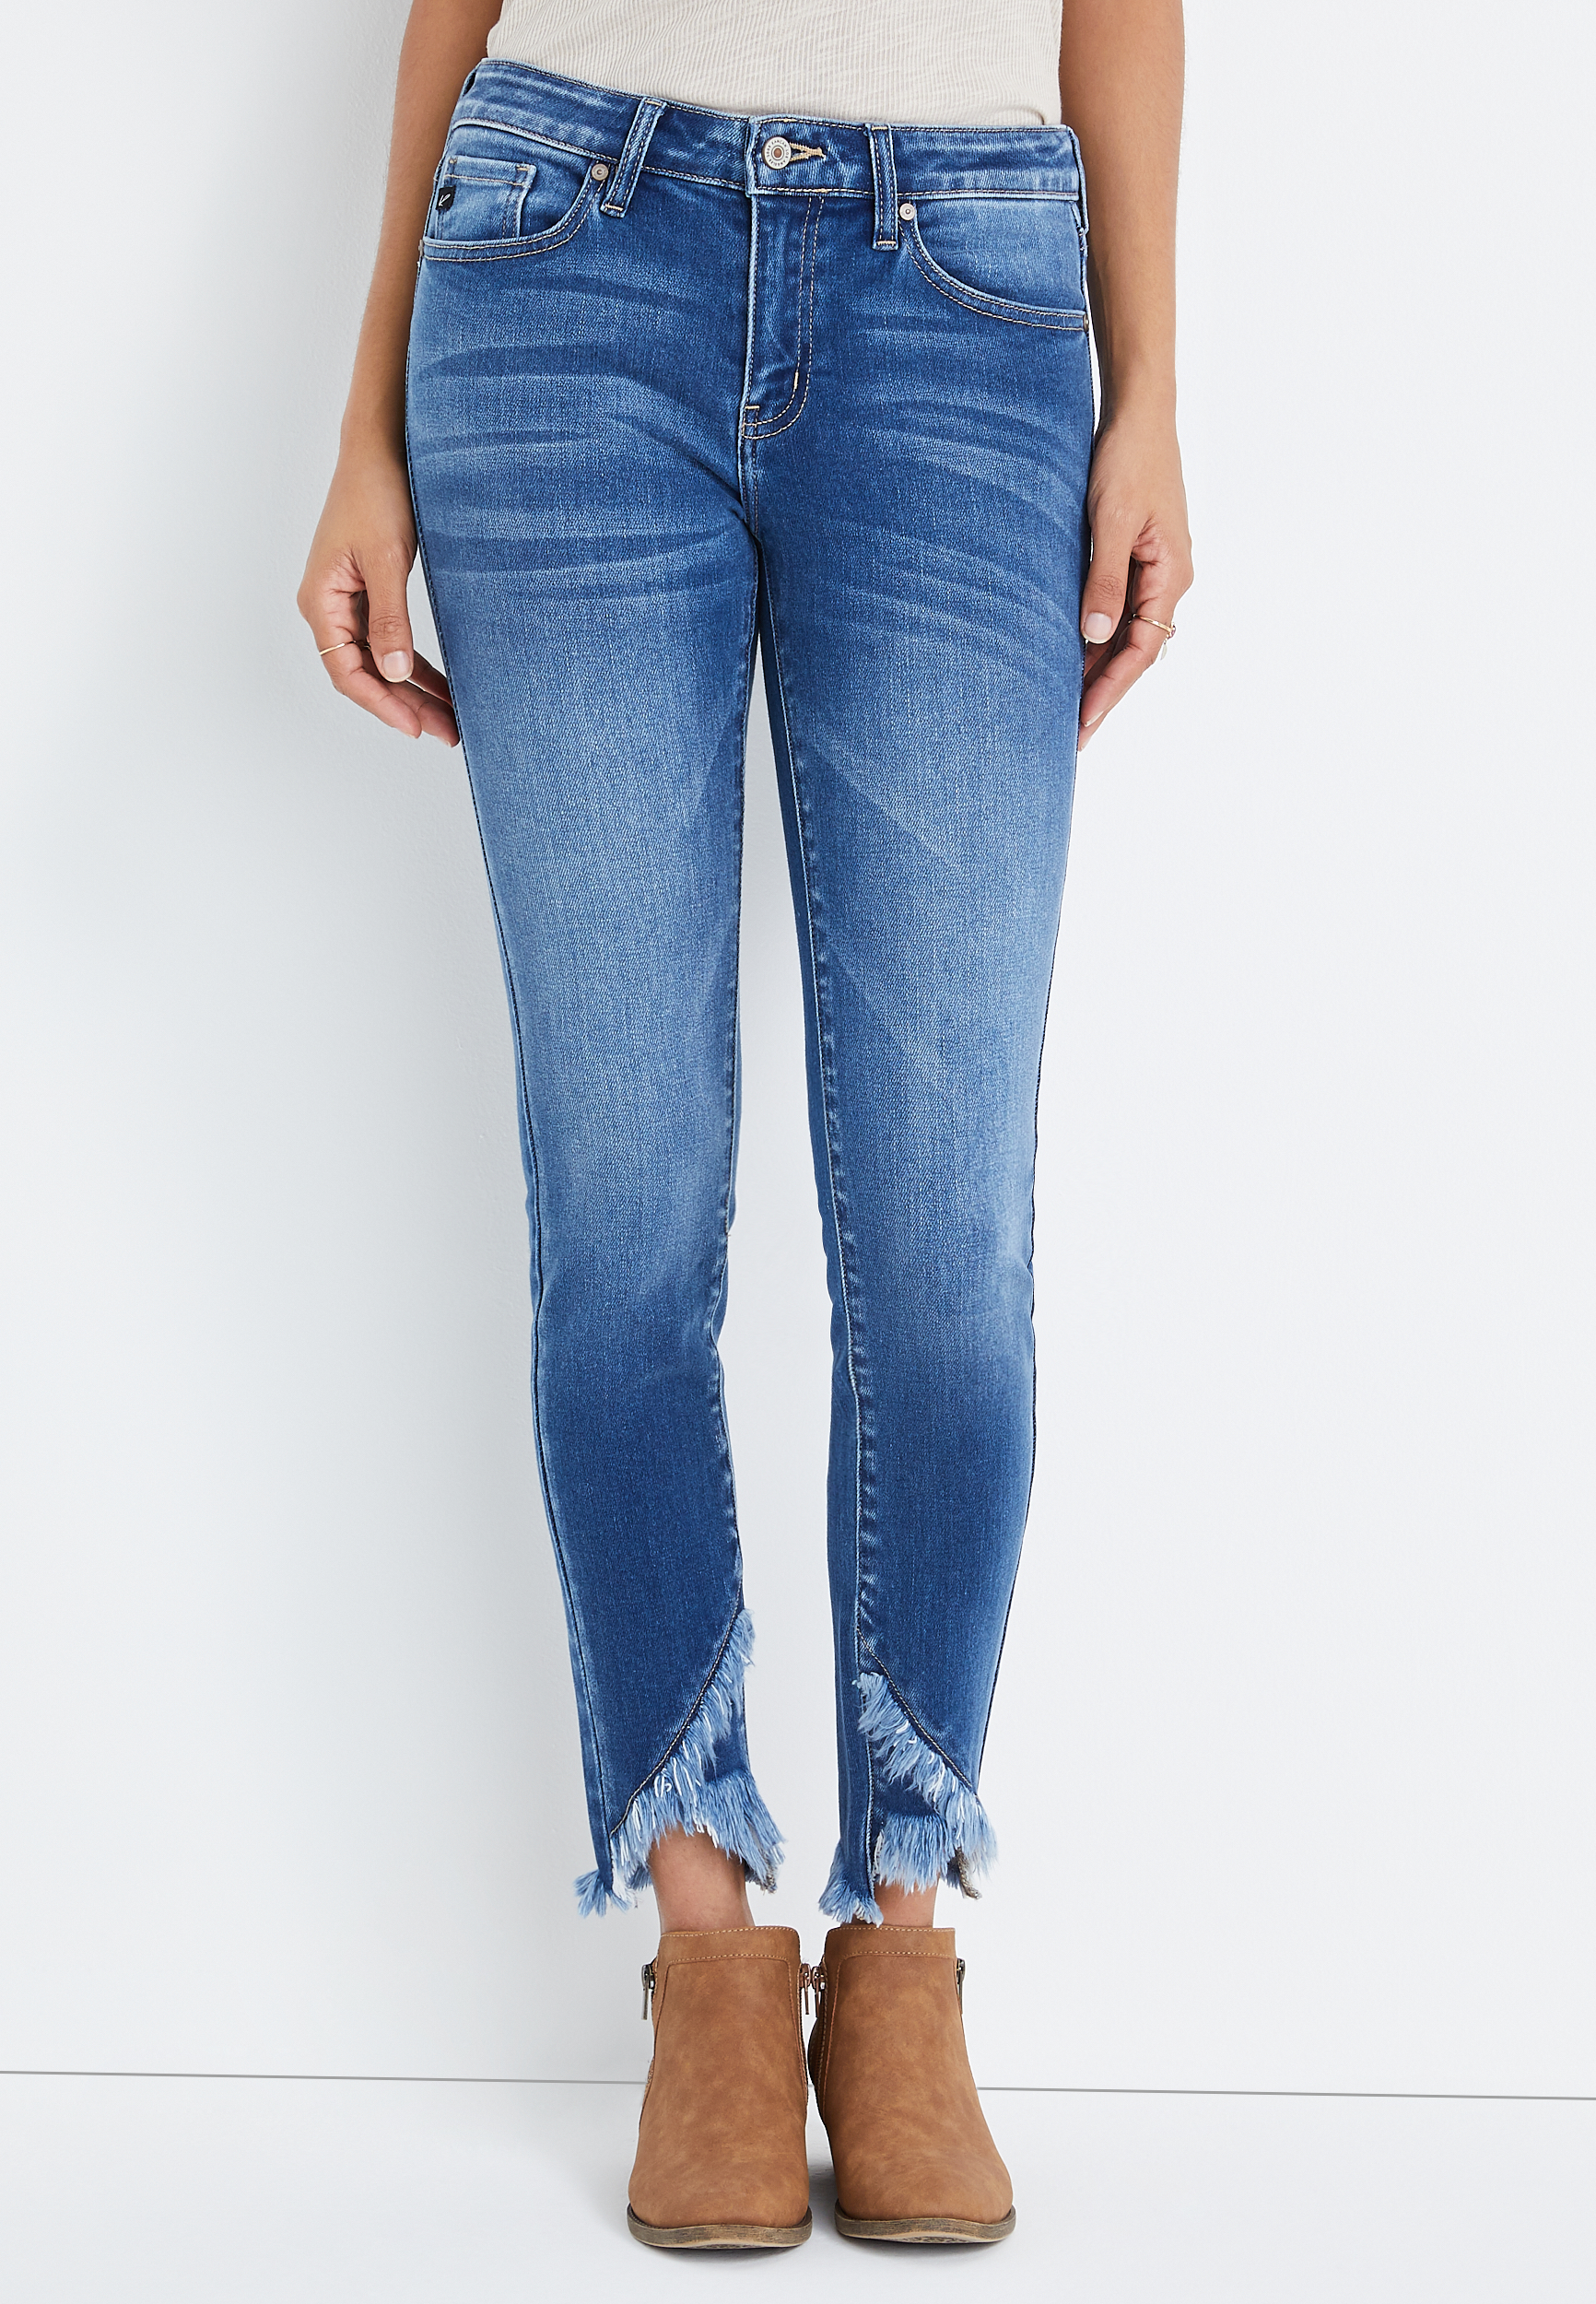 Kan Can Jeans Baleria-Caton Mid-Rise Distressed Frayed Hem Medium Wash Cropped Skinny Jeans KC6108M 